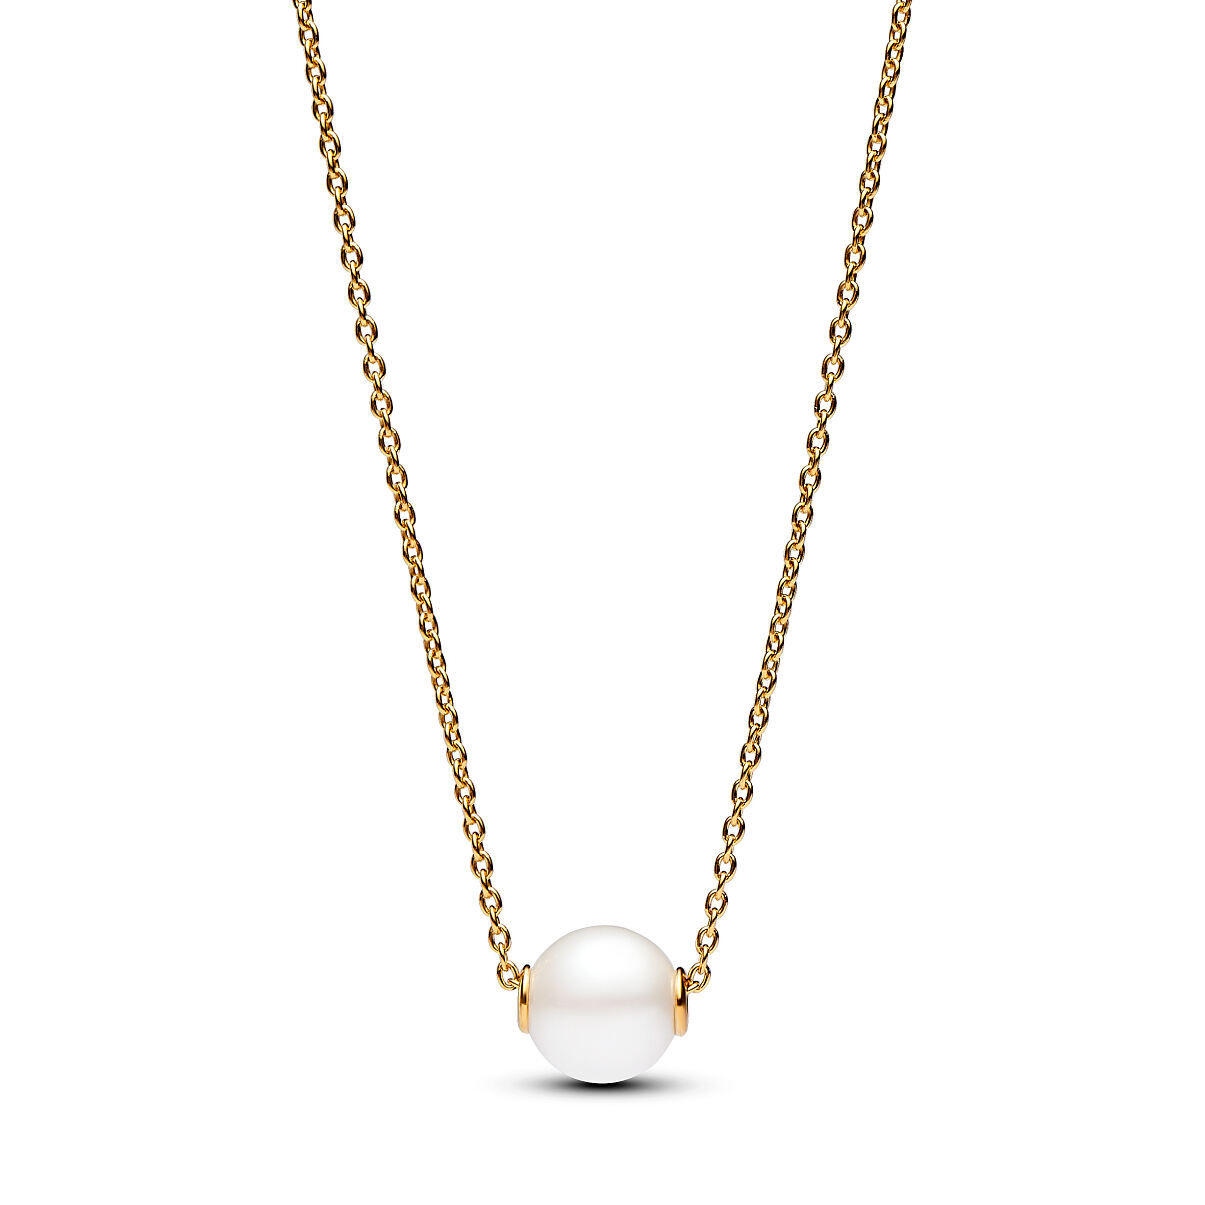 Pandora_Necklace_14k Gold-plated_Freshwater Pearls_Cubic Zirconia_363167C01_179,00 Euro (4)